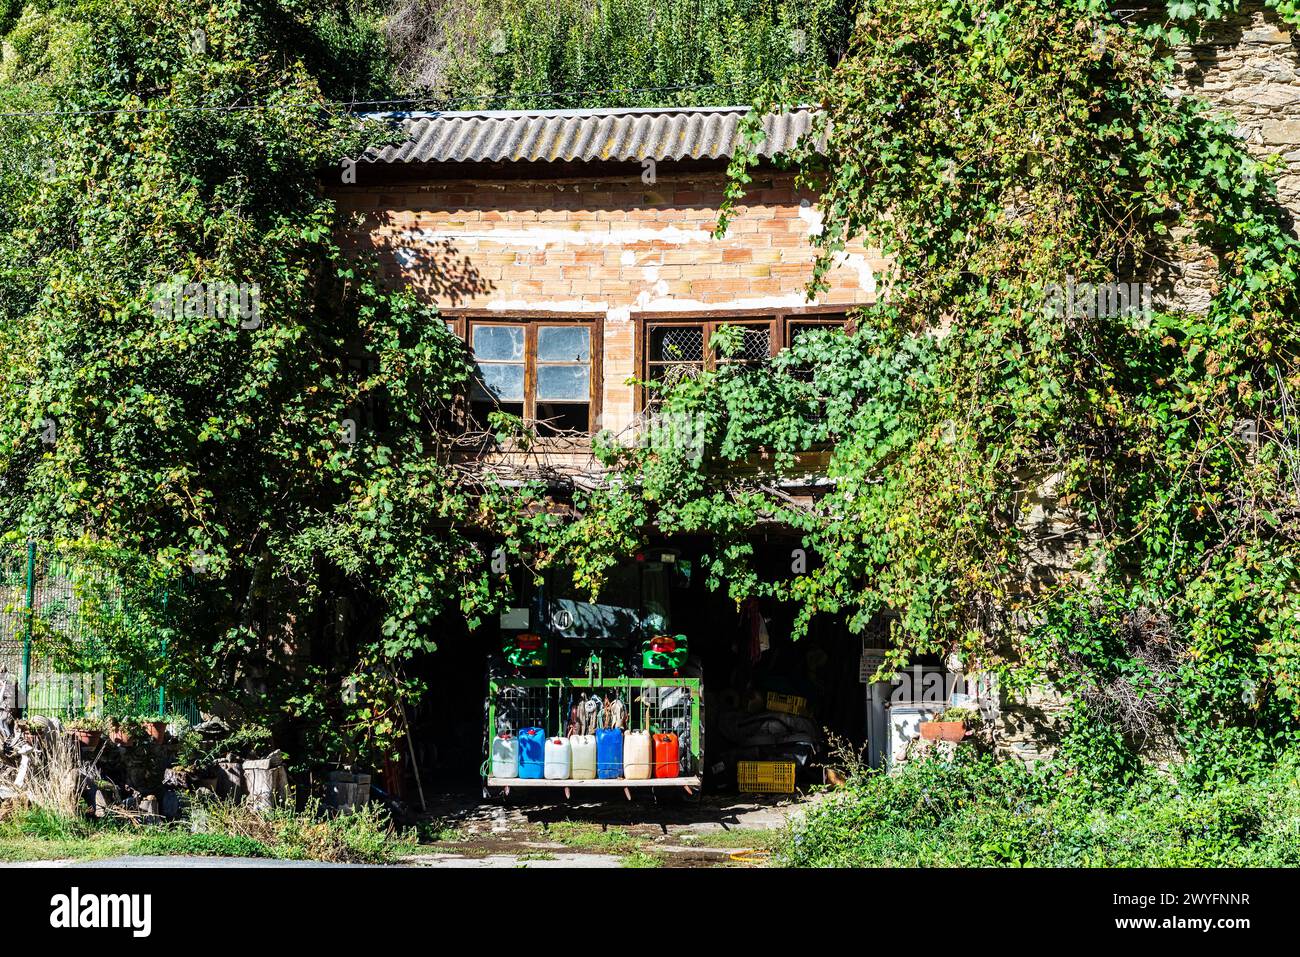 Facade of an old house of the rustic village of Llavorsi, Lleida, Catalonia, Spain Stock Photo